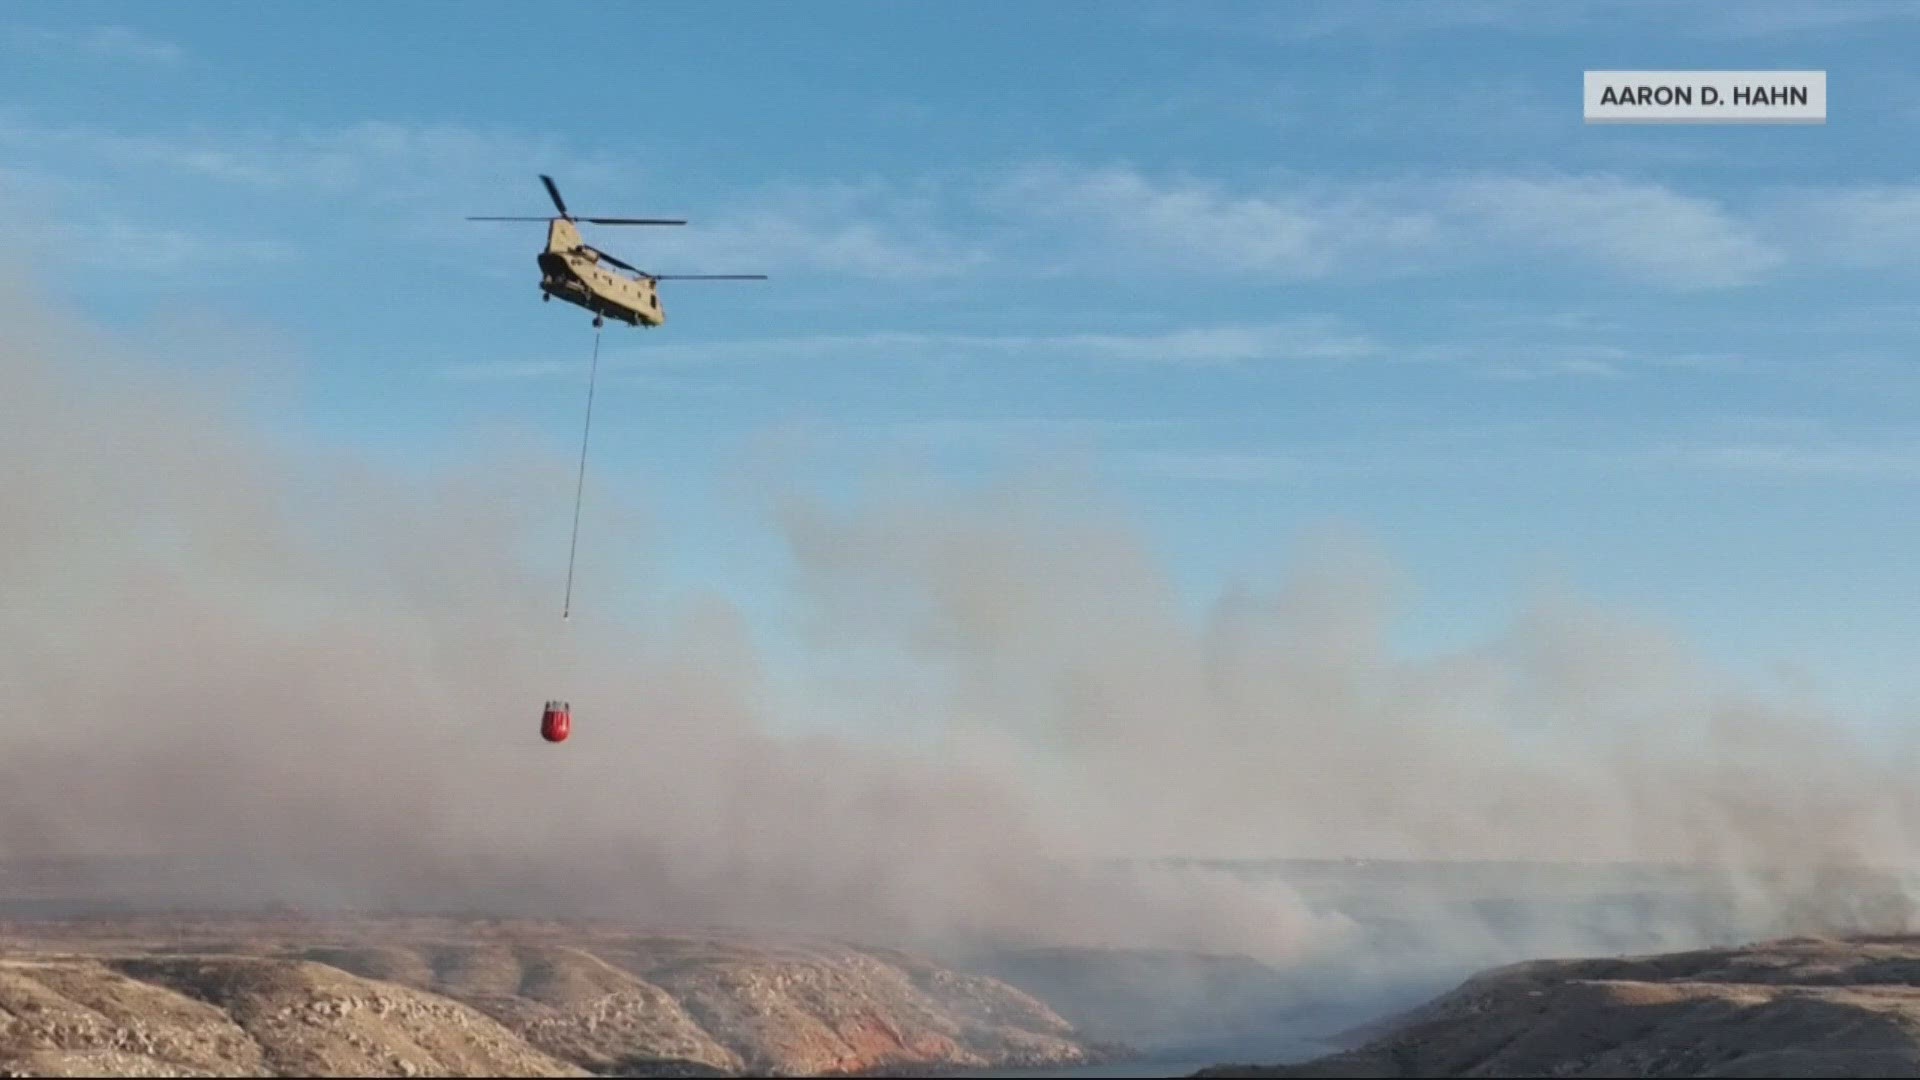 A strike team from the Oregon Department of Forestry has deployed to help fight the wildfires in Amarillo, Texas.